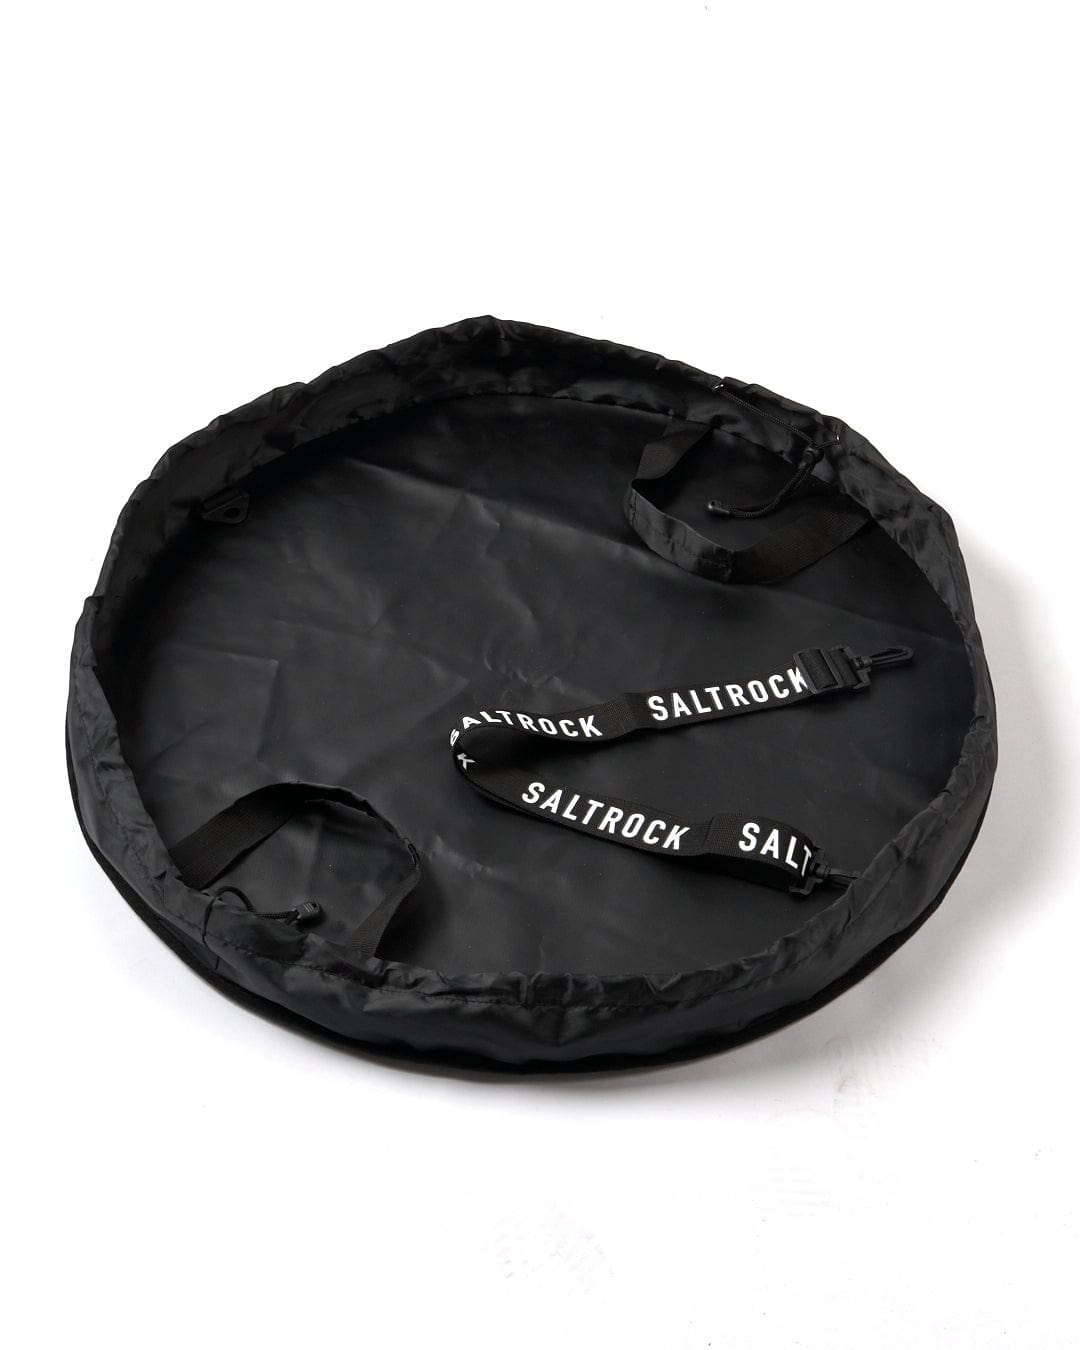 A round black lightweight Core Surf Changing Mat - Black/White with a strap attached to it by Saltrock.